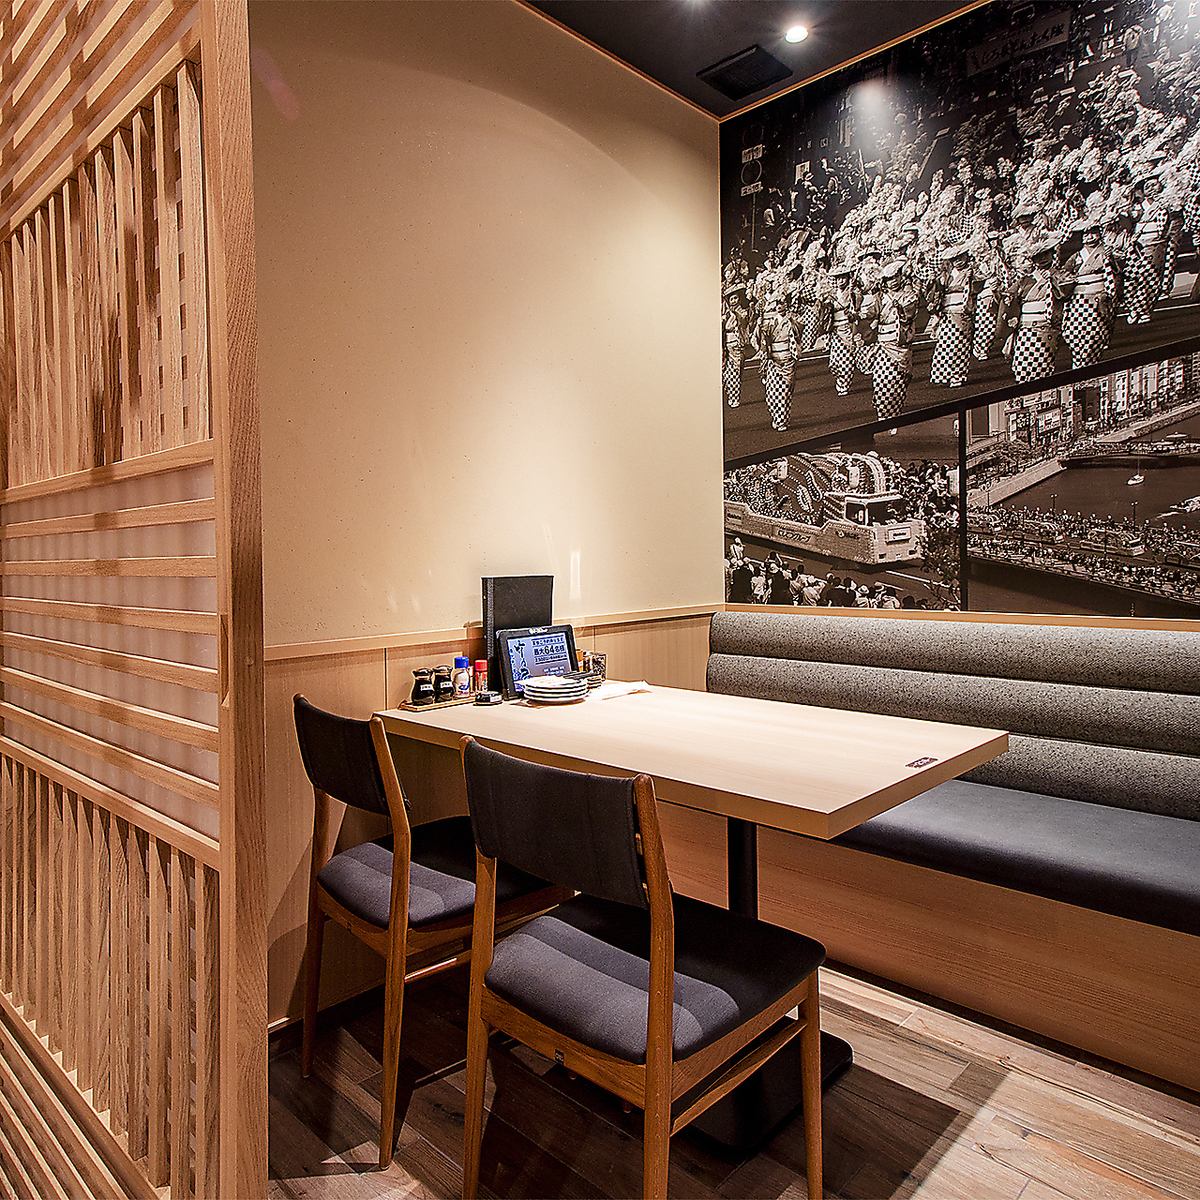 Perfect for all kinds of banquets! We have private rooms where you can order via touch panel!